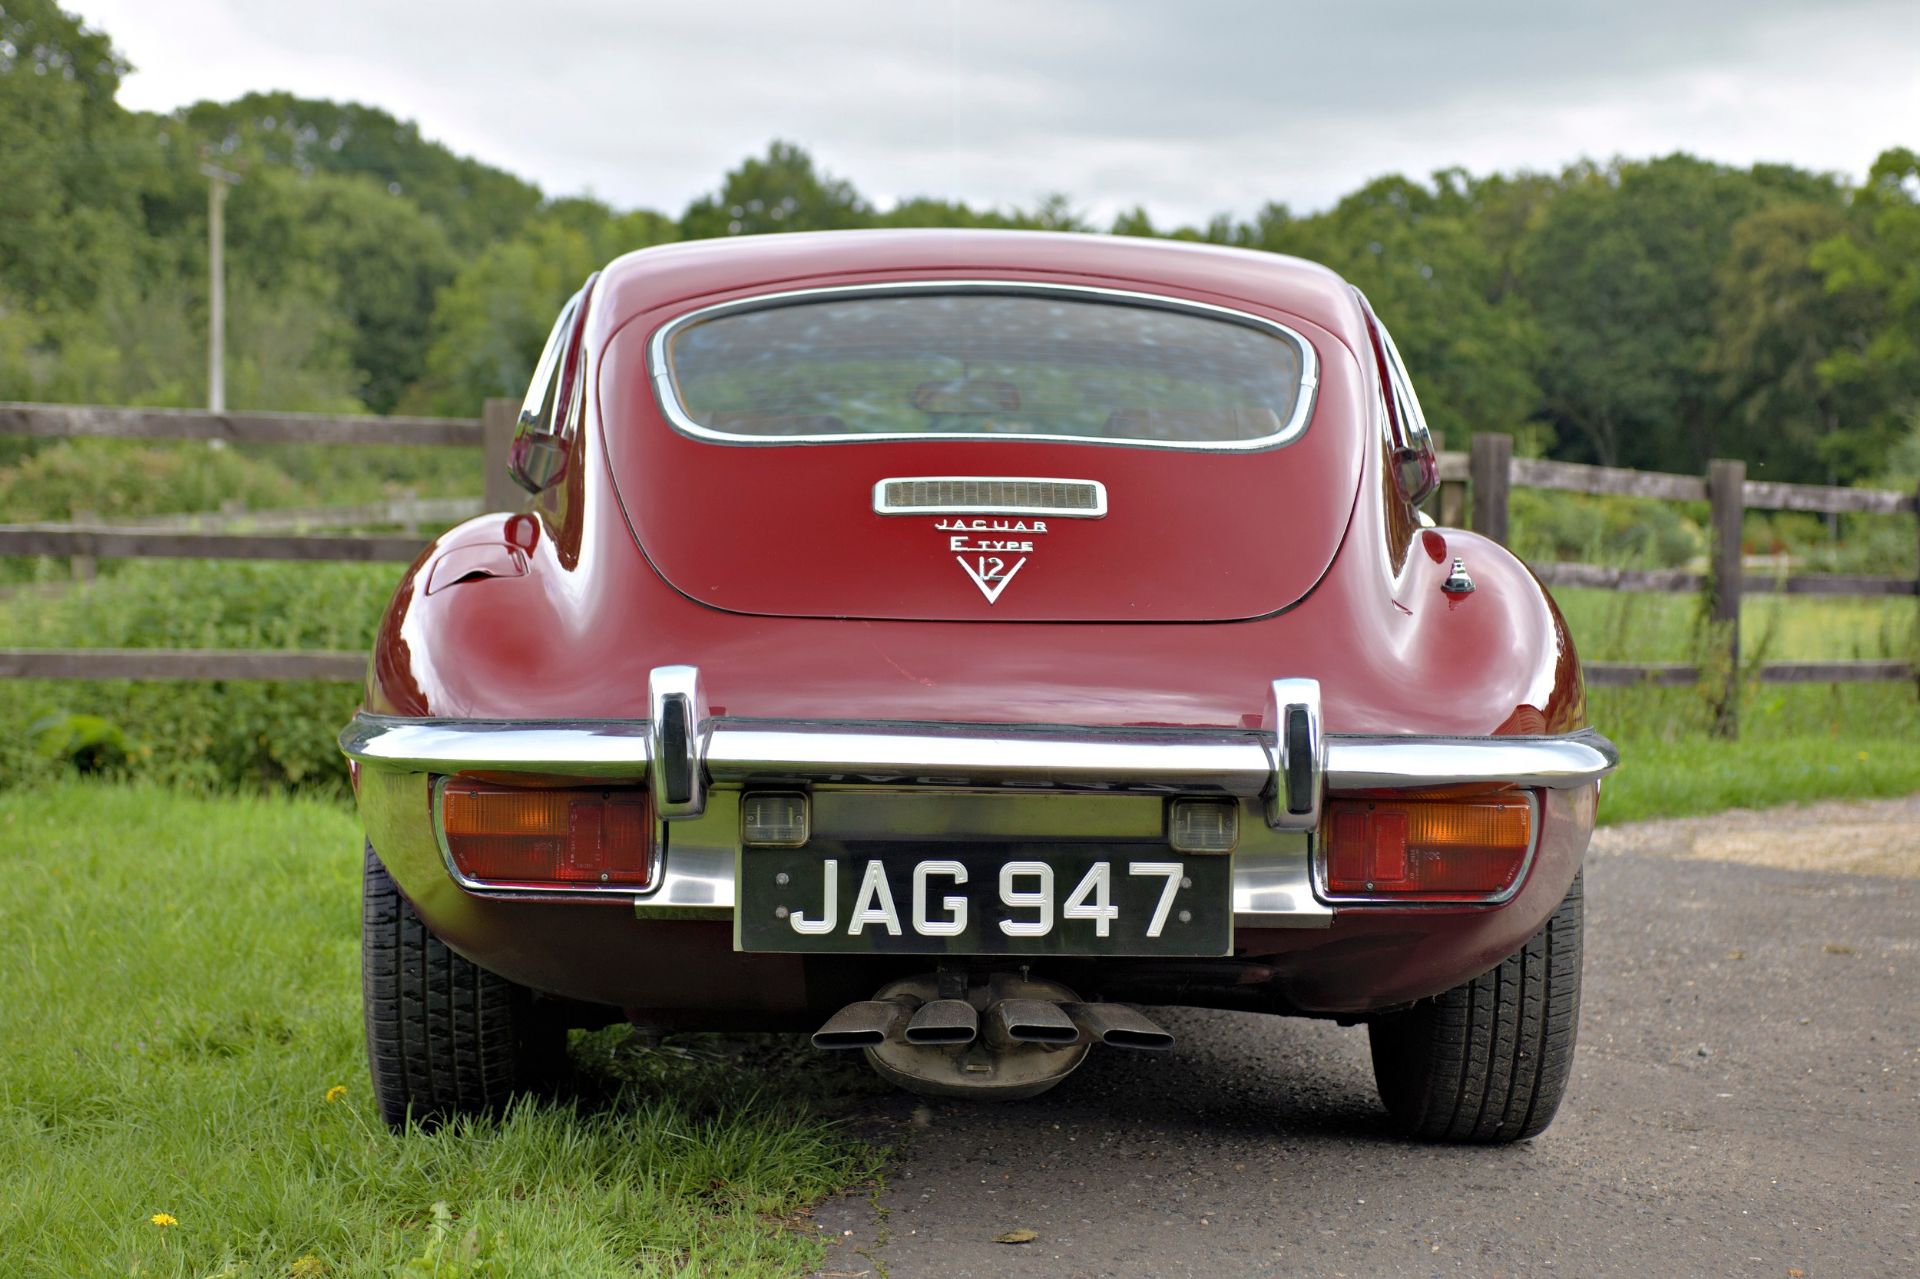 1972 JAGUAR E-TYPE SERIES III FIXED HEAD COUPE Registration: JAG 947 - Image 4 of 36